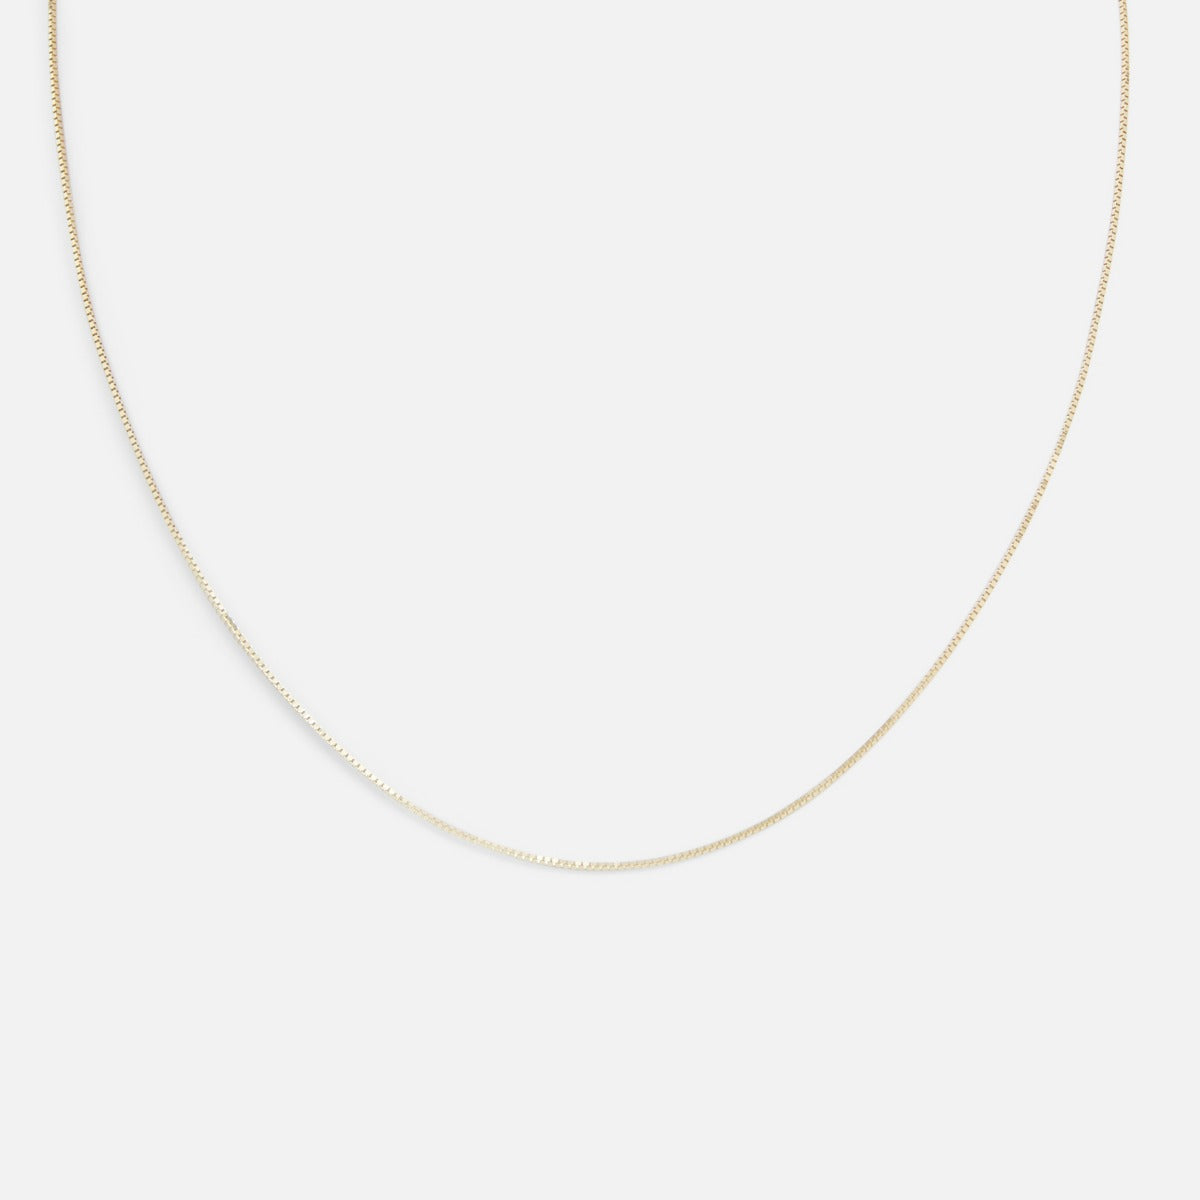 16" square chain 10k yellow gold 